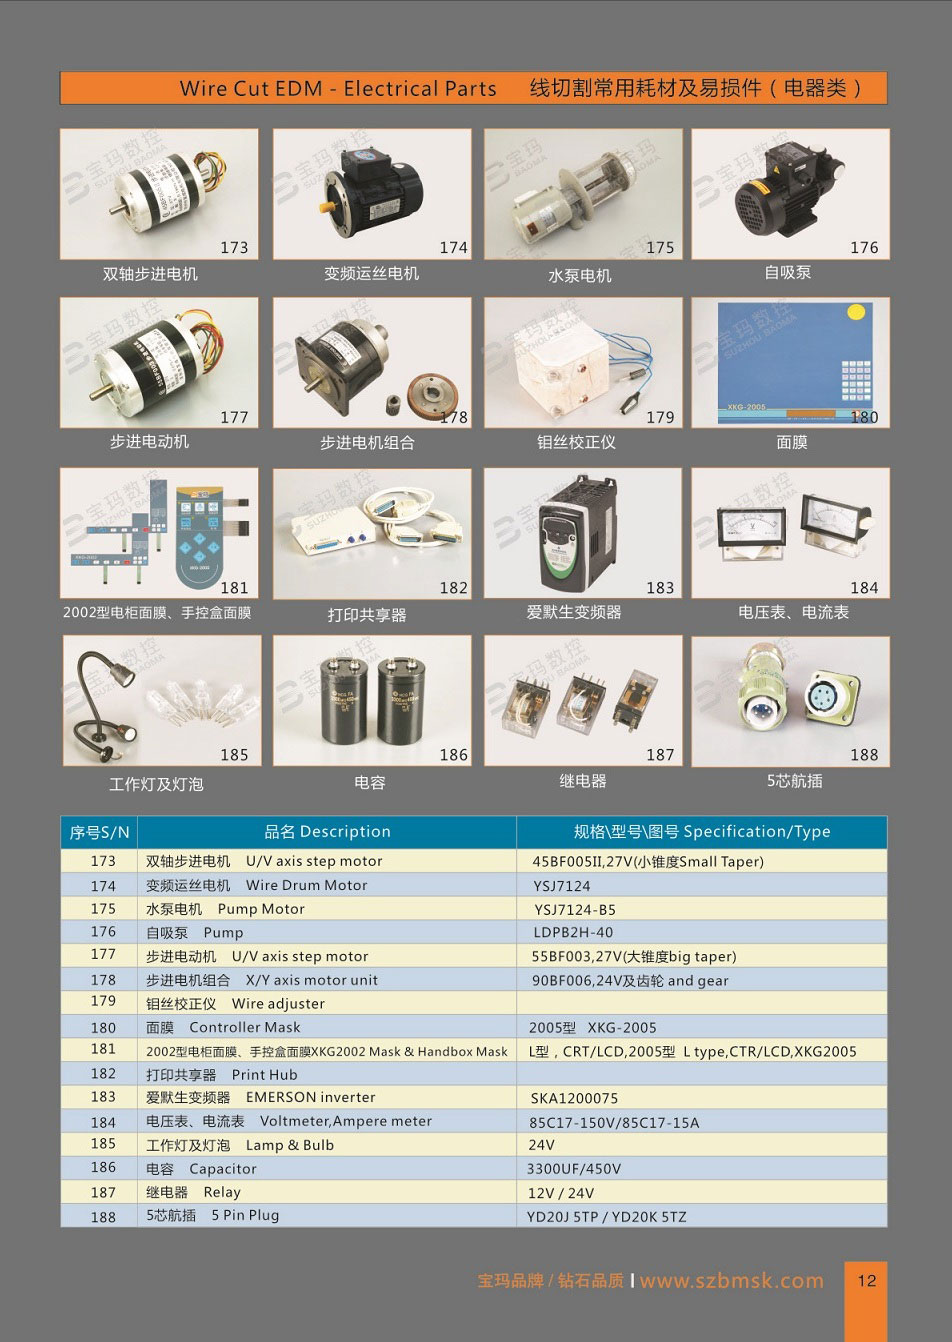 PCB Cards and other Electrical Parts for Wire Cut Machines